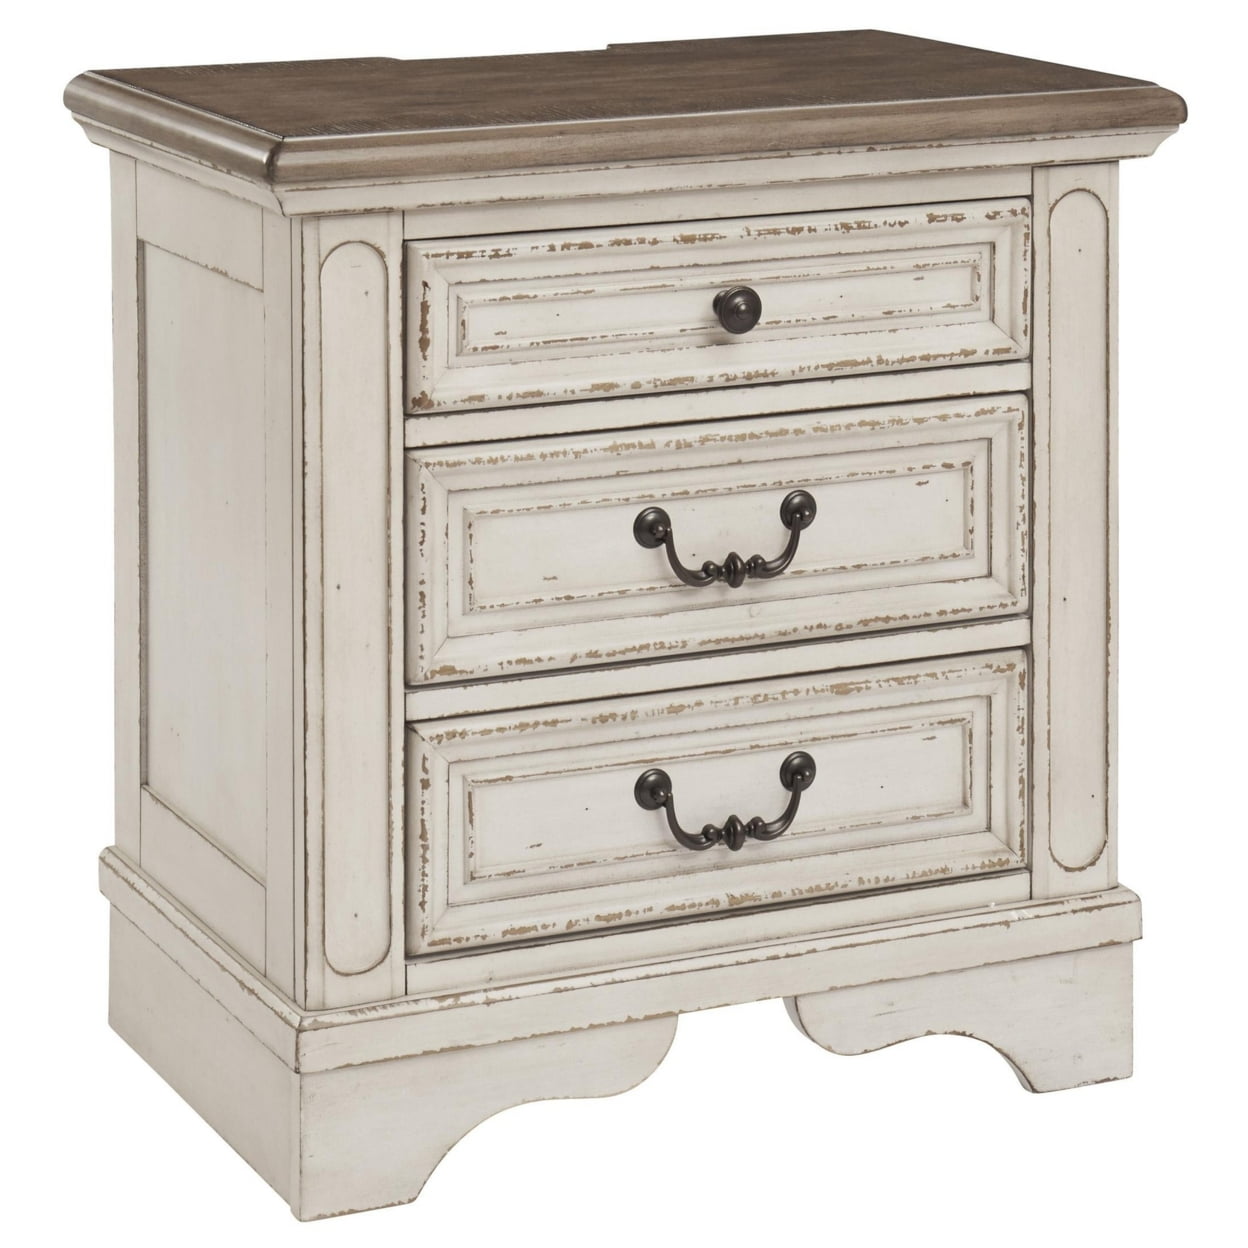 Picture of Benjara BM213305 Transitional Wooden Three Drawer Nightstand with Open Platform Top - White - 27.75 x 27 x 17 in.